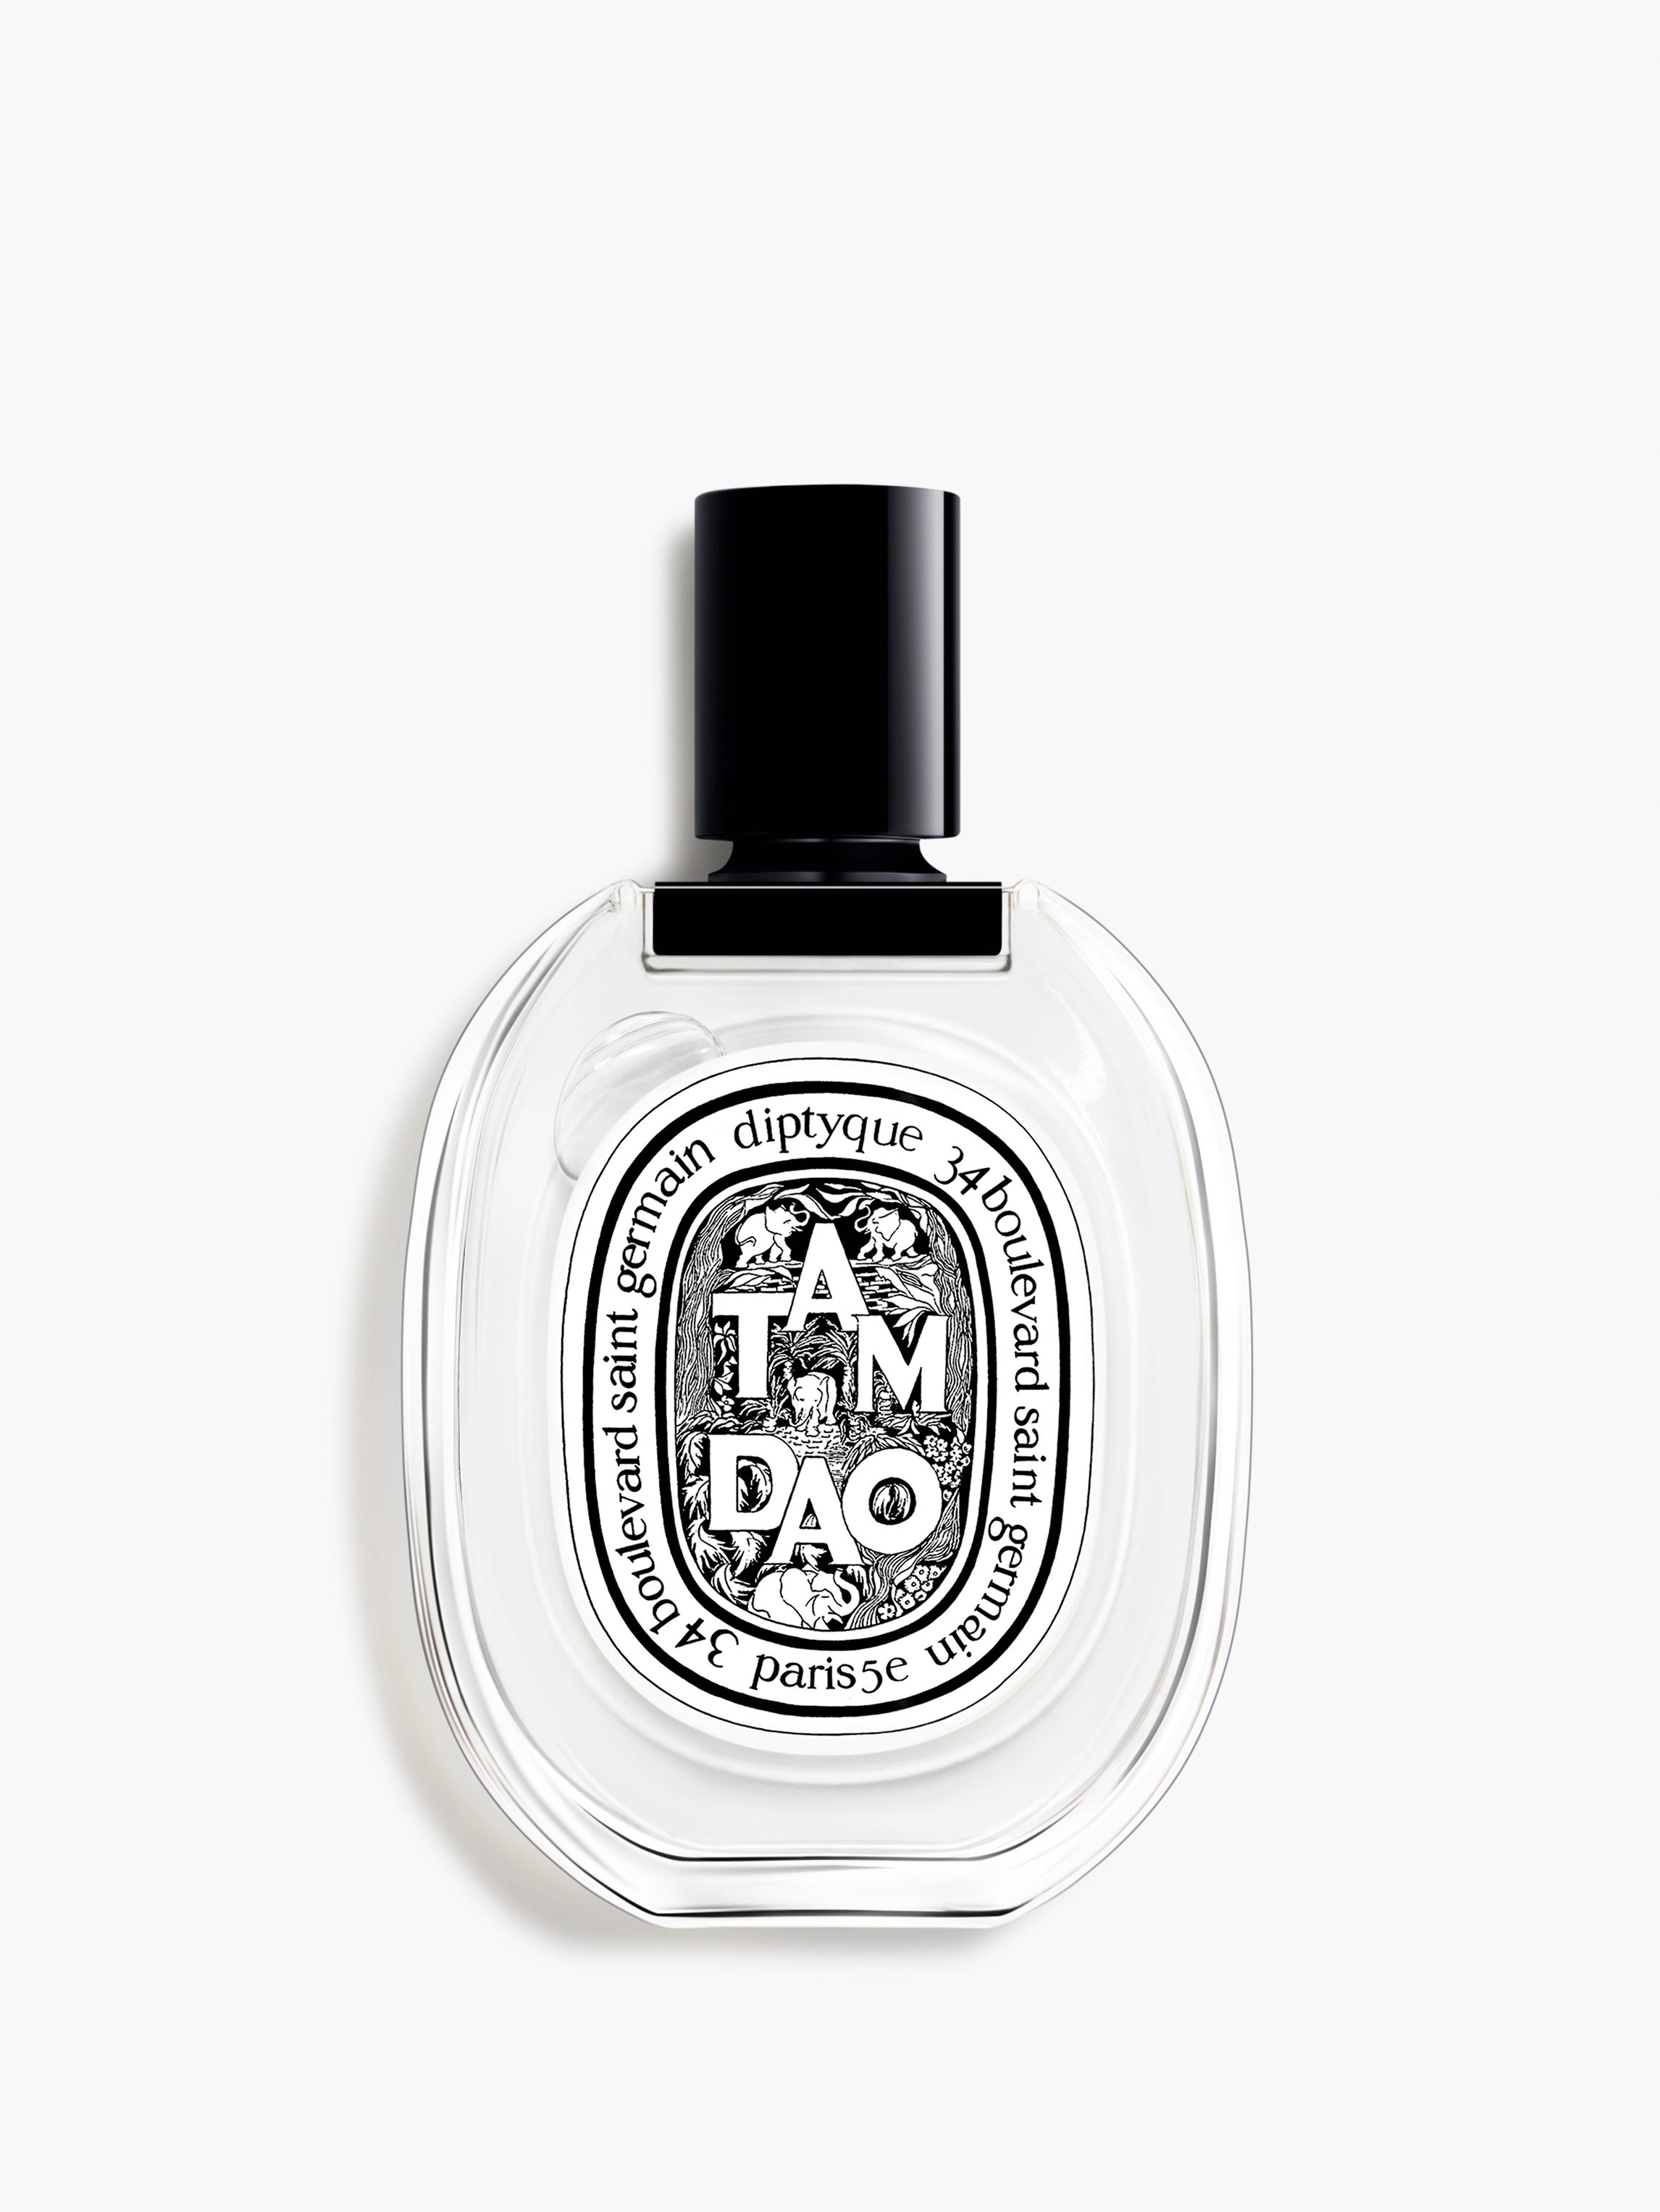 Diptyques New PretsAParfumer Collection Is Making It Possible To Wear  Your Perfume In A Totally Unexpected Way